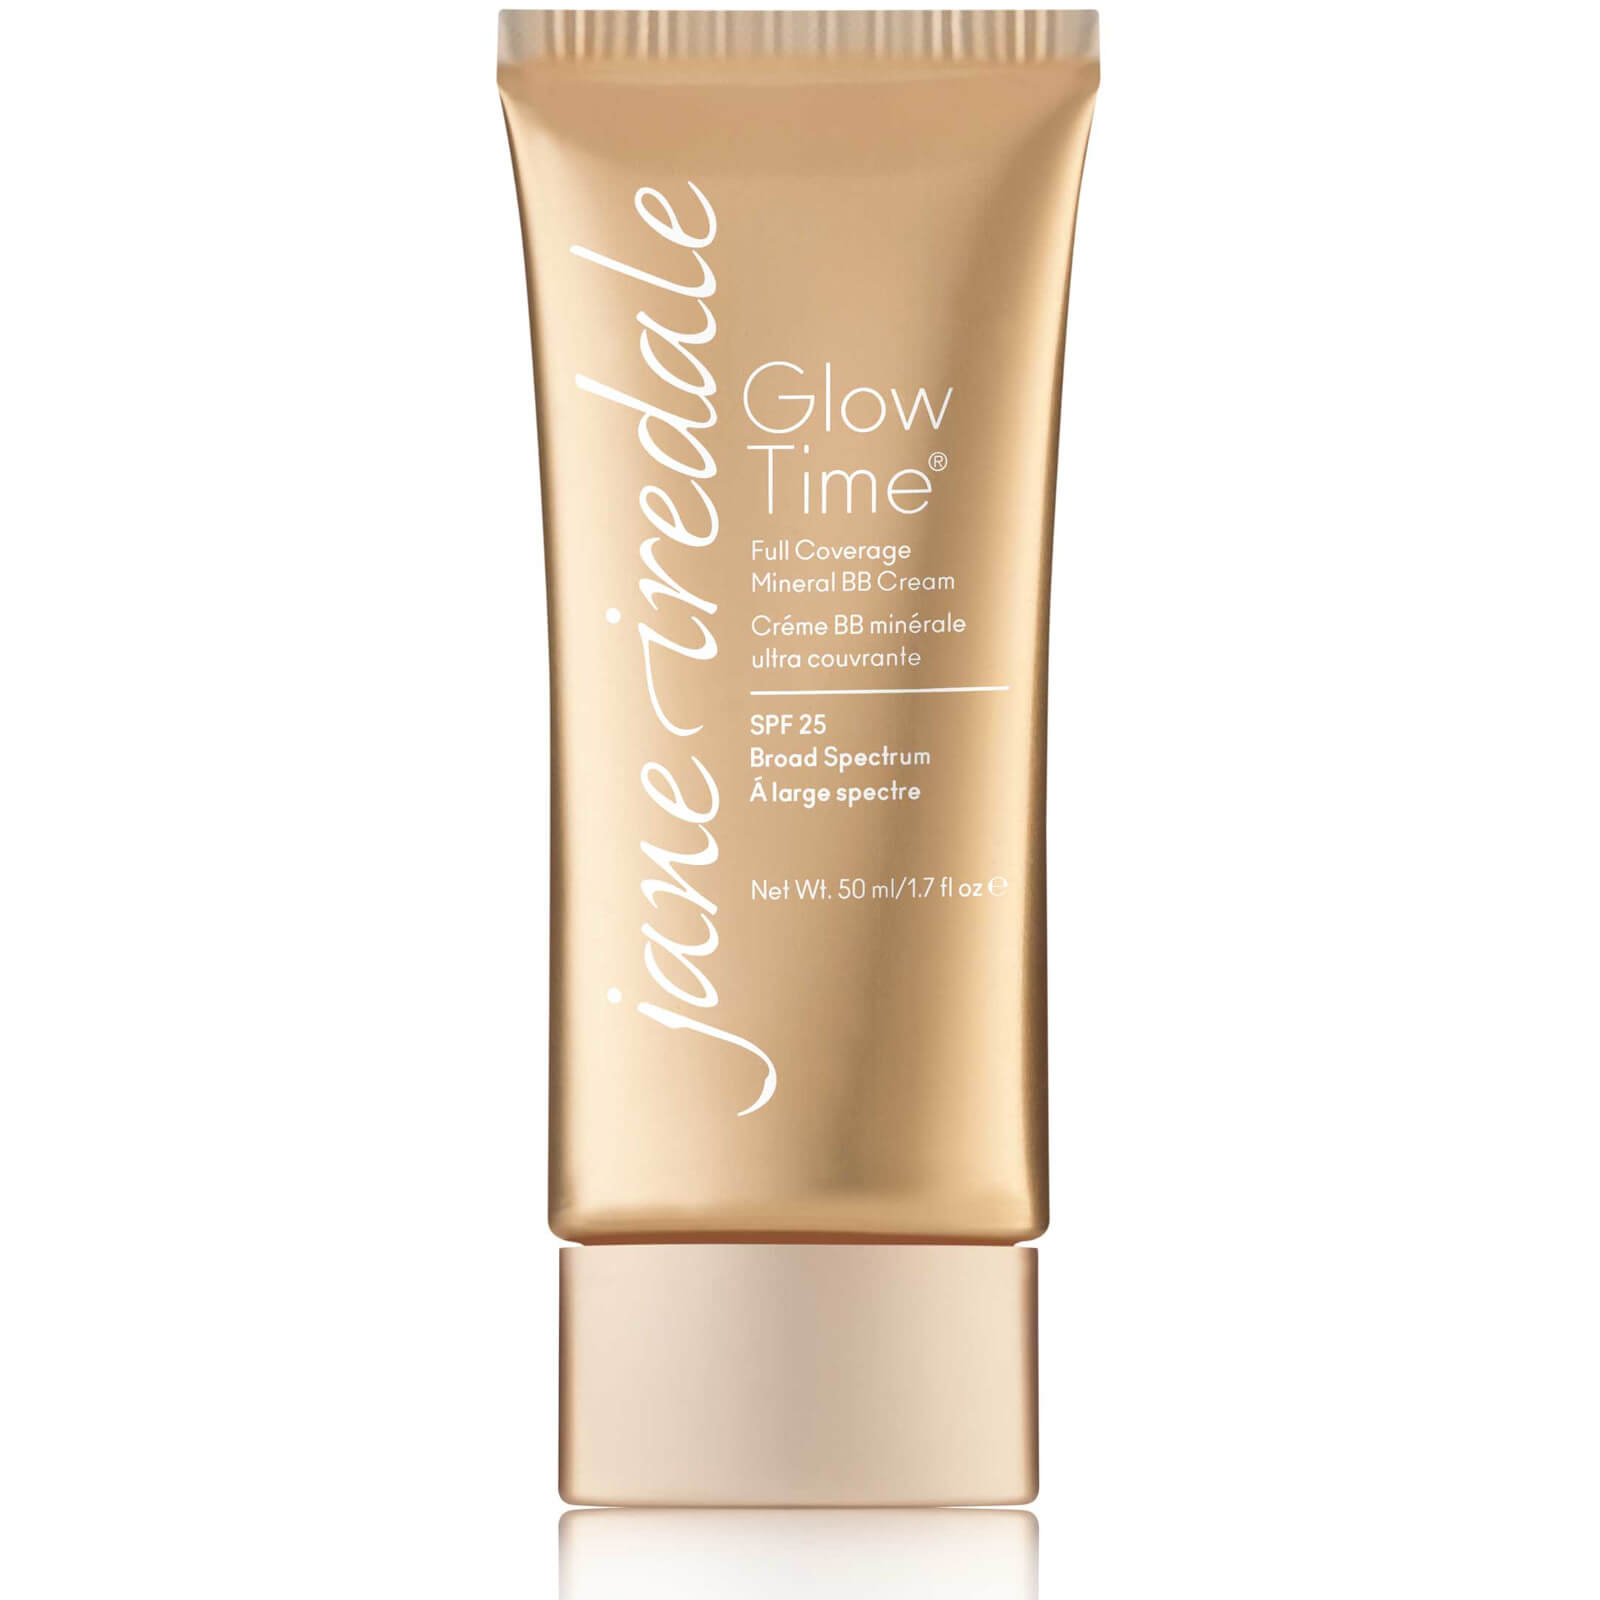 jane iredale Glow Time Full Coverage Mineral BB Cream 50ml (Various Shades) - BB6 - SPF25